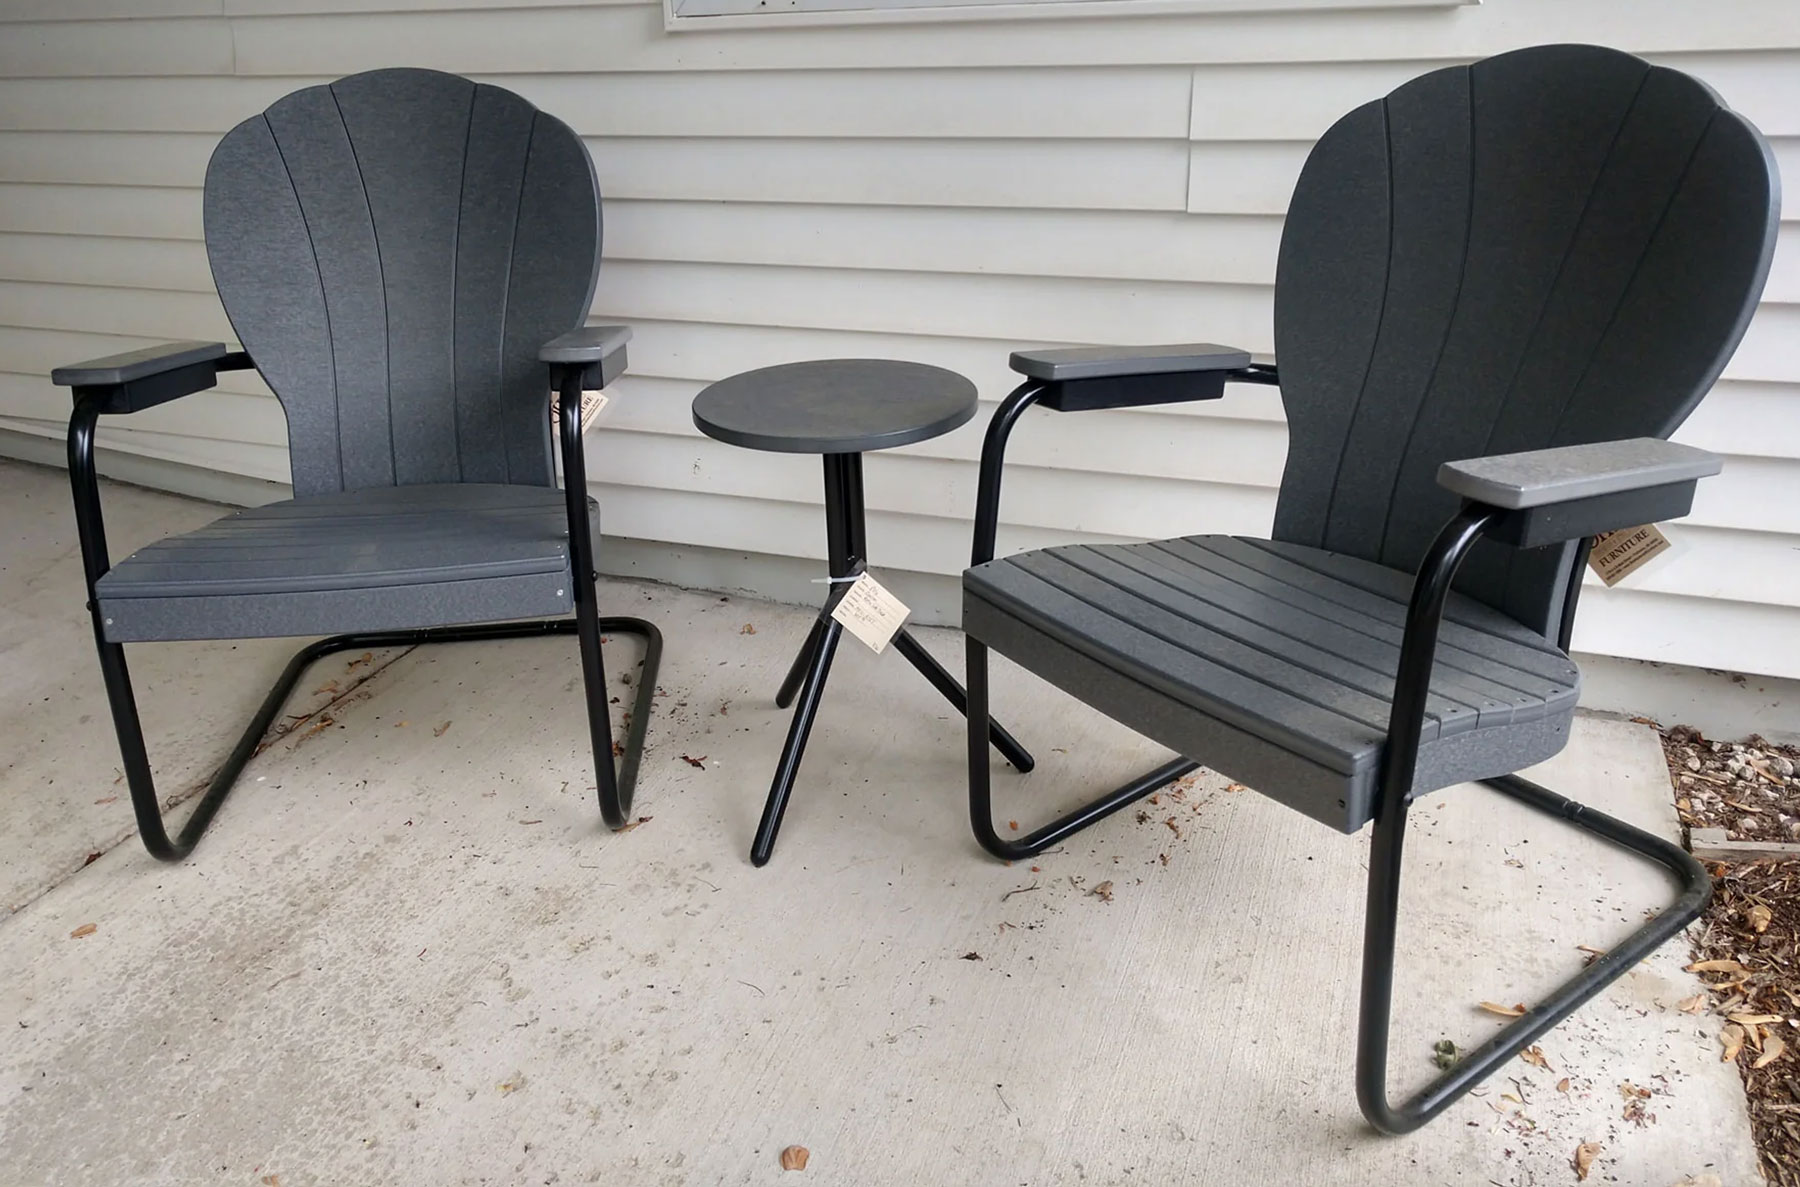 (2) Manchester Poly Chairs and (1) Retro Side Table in Charcoal